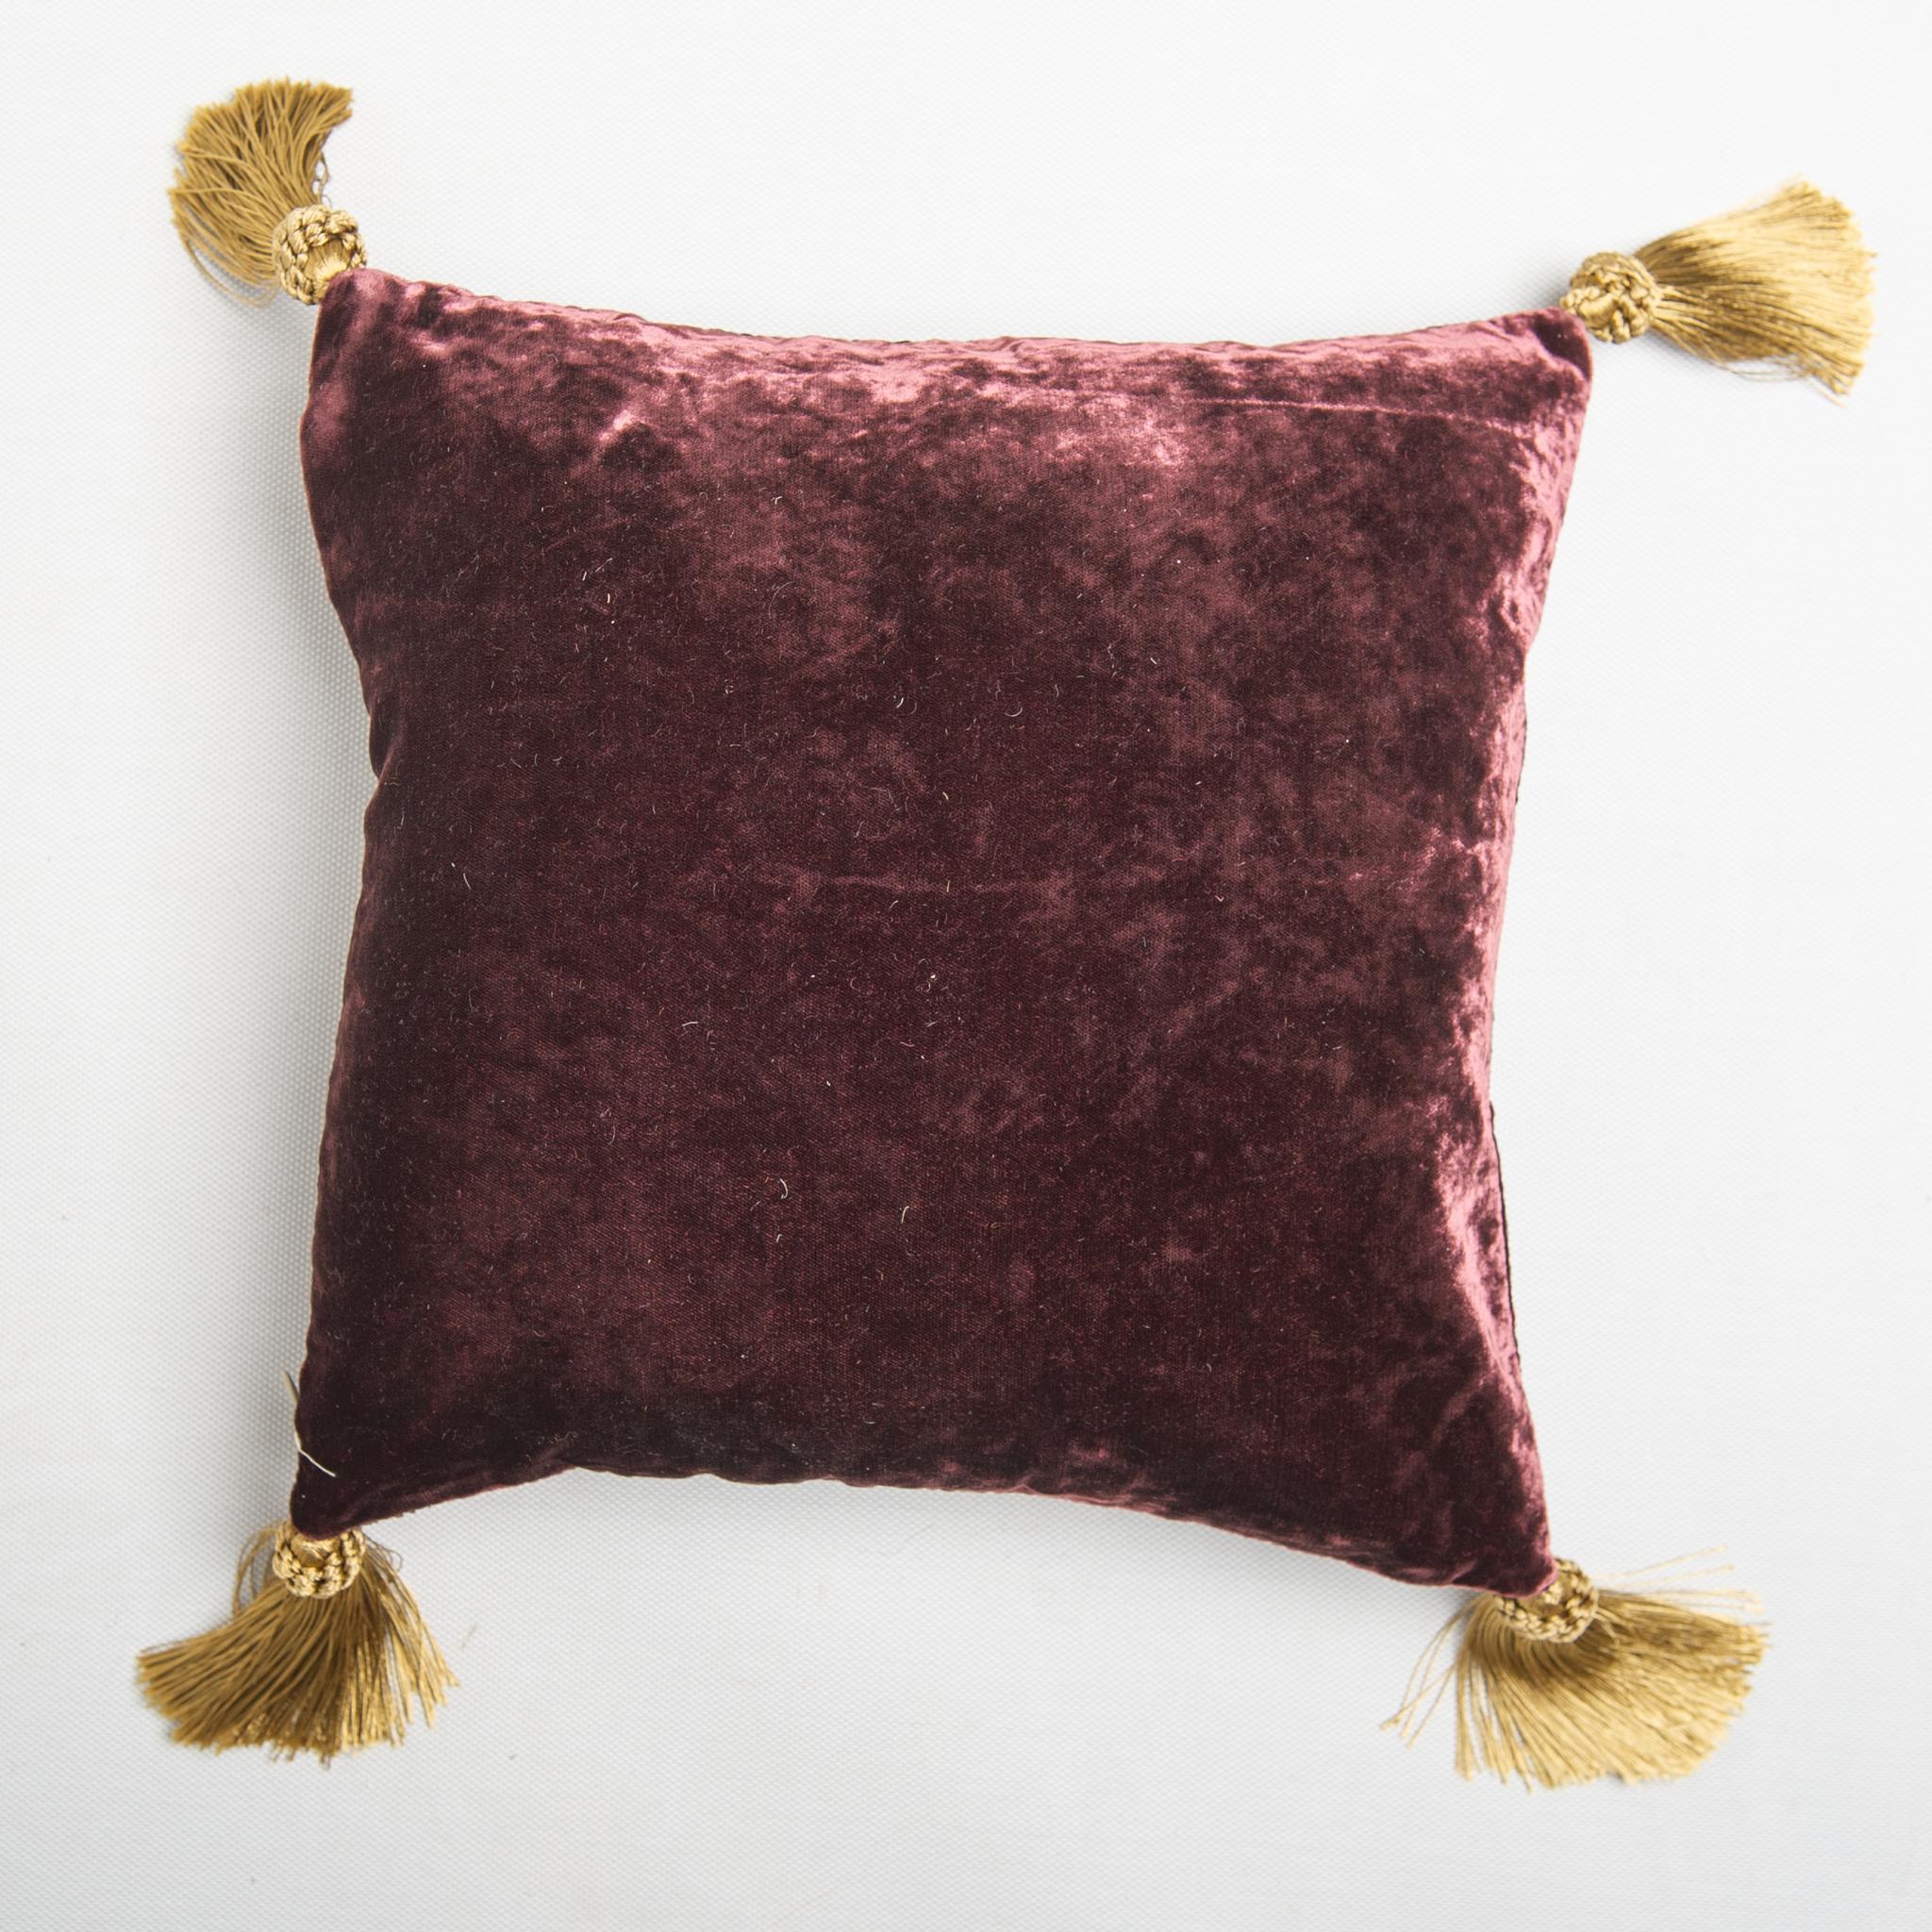 B/1624 -  Cushion or pillow in plum-colored velvet with bronze checkered design .
By Hope and Phillips -